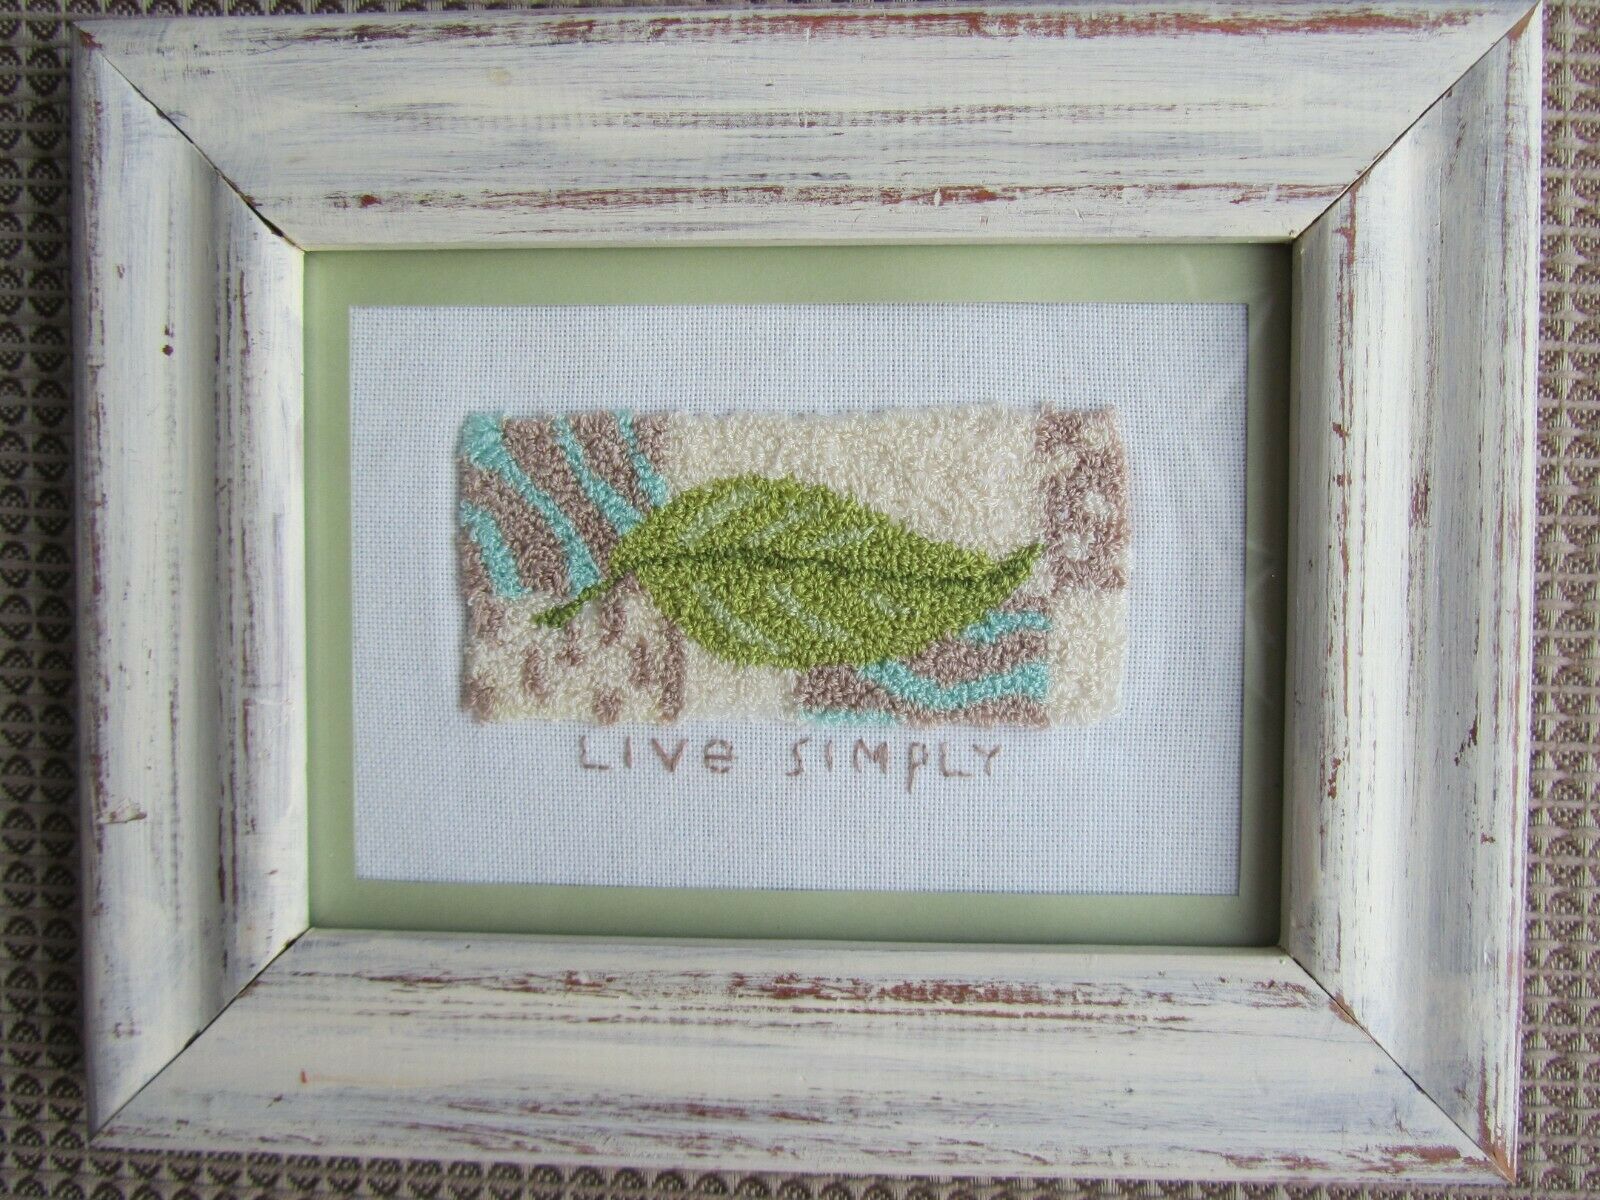 Completed And Framed Punch Needle Picture " Live Simply"